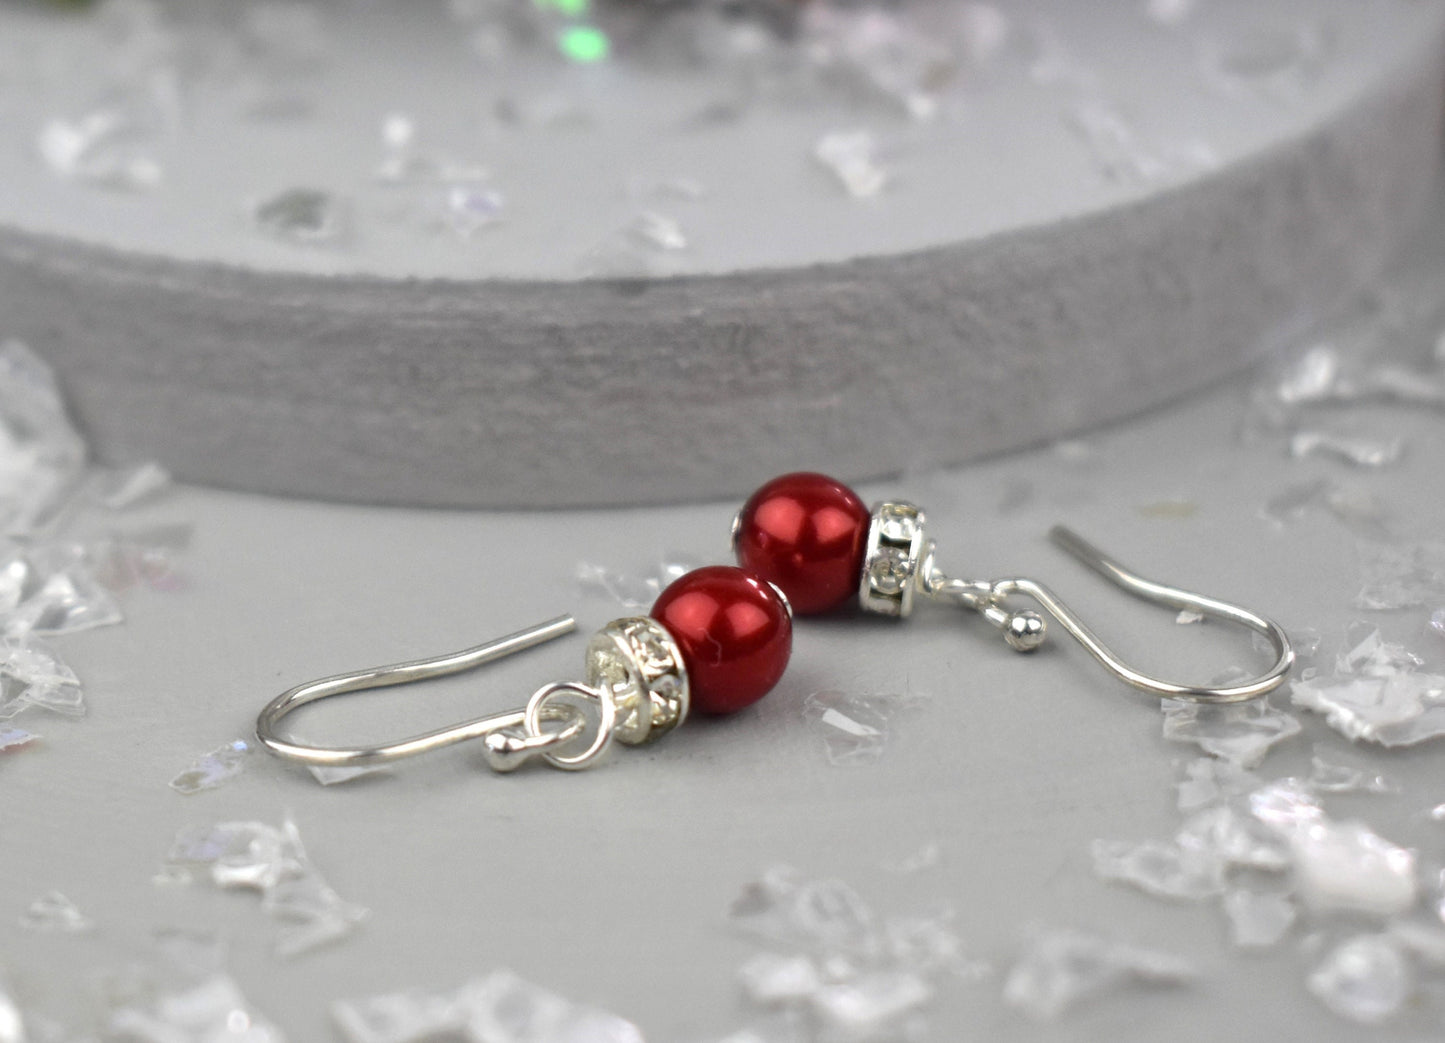 High quality glass pearl topped with a silver sparkling rondell bead and suspended from sterling silver ear wires. Christmas bauble earrings.